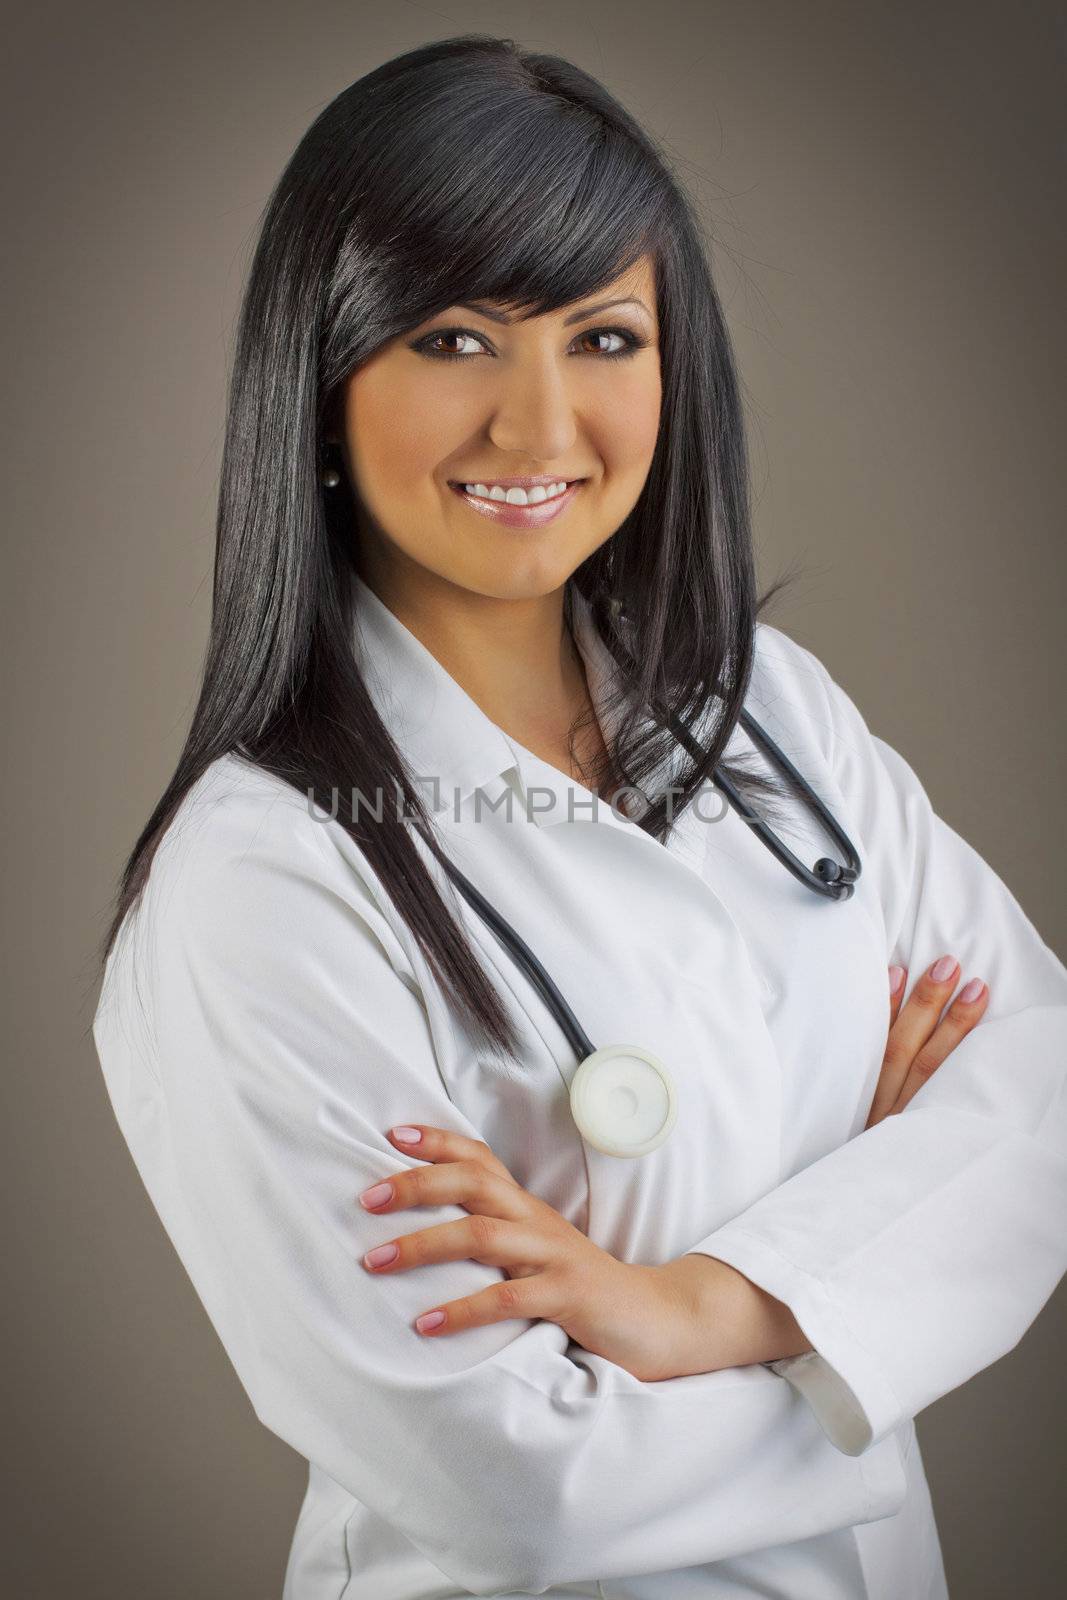 Smiling medical doctor with stethoscope by ozaiachin